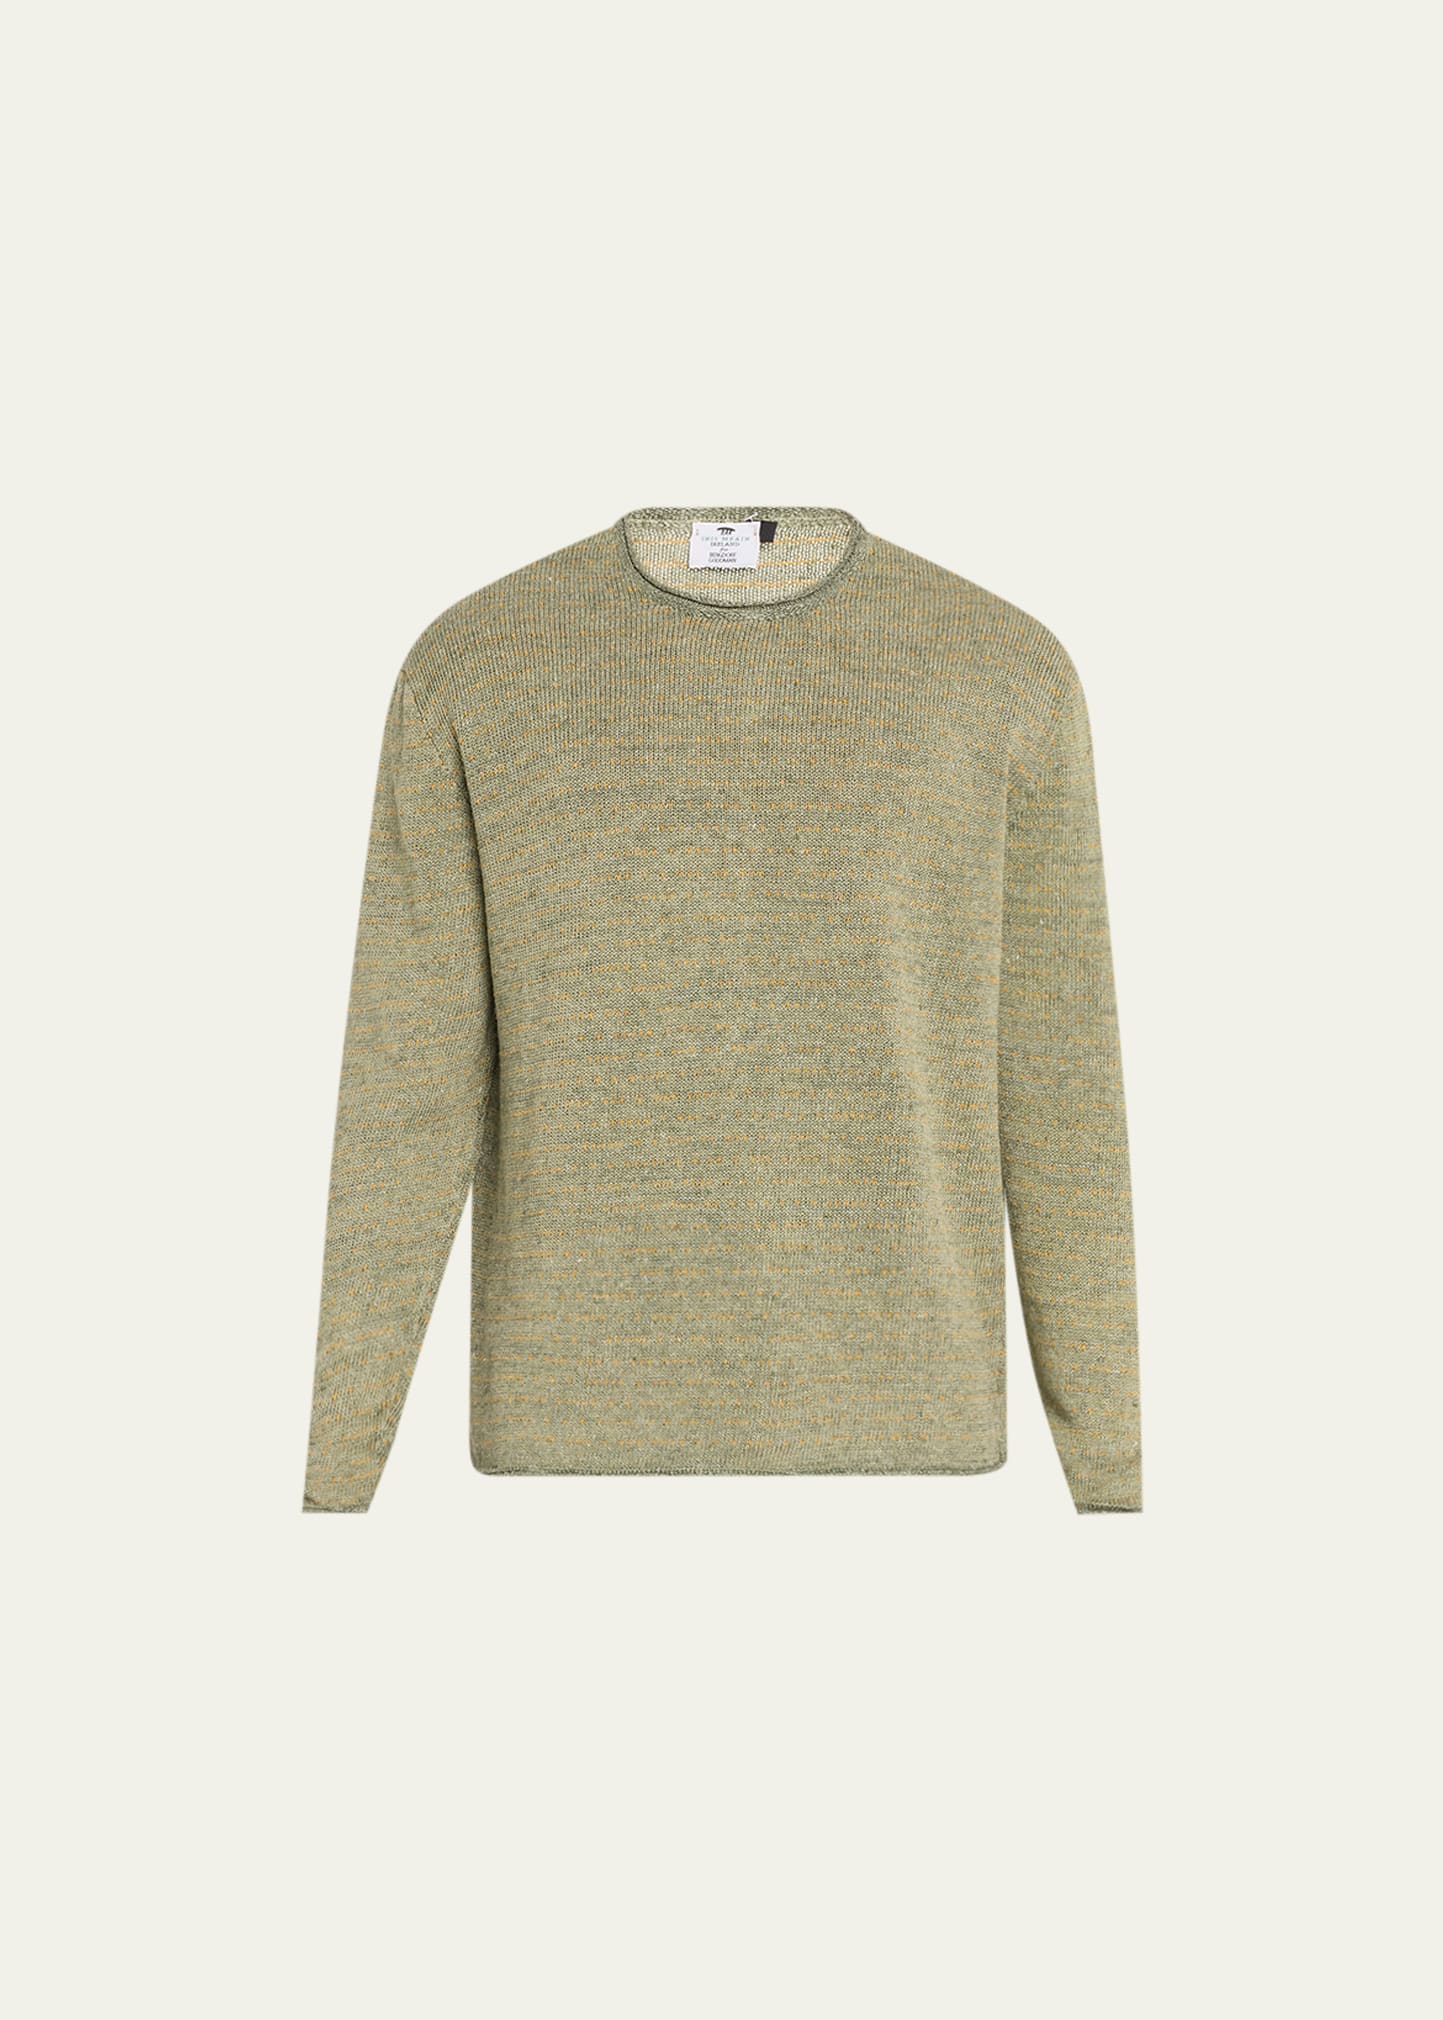 Inis Meain Men's Linen Knit Crewneck Sweater In Greene Mix